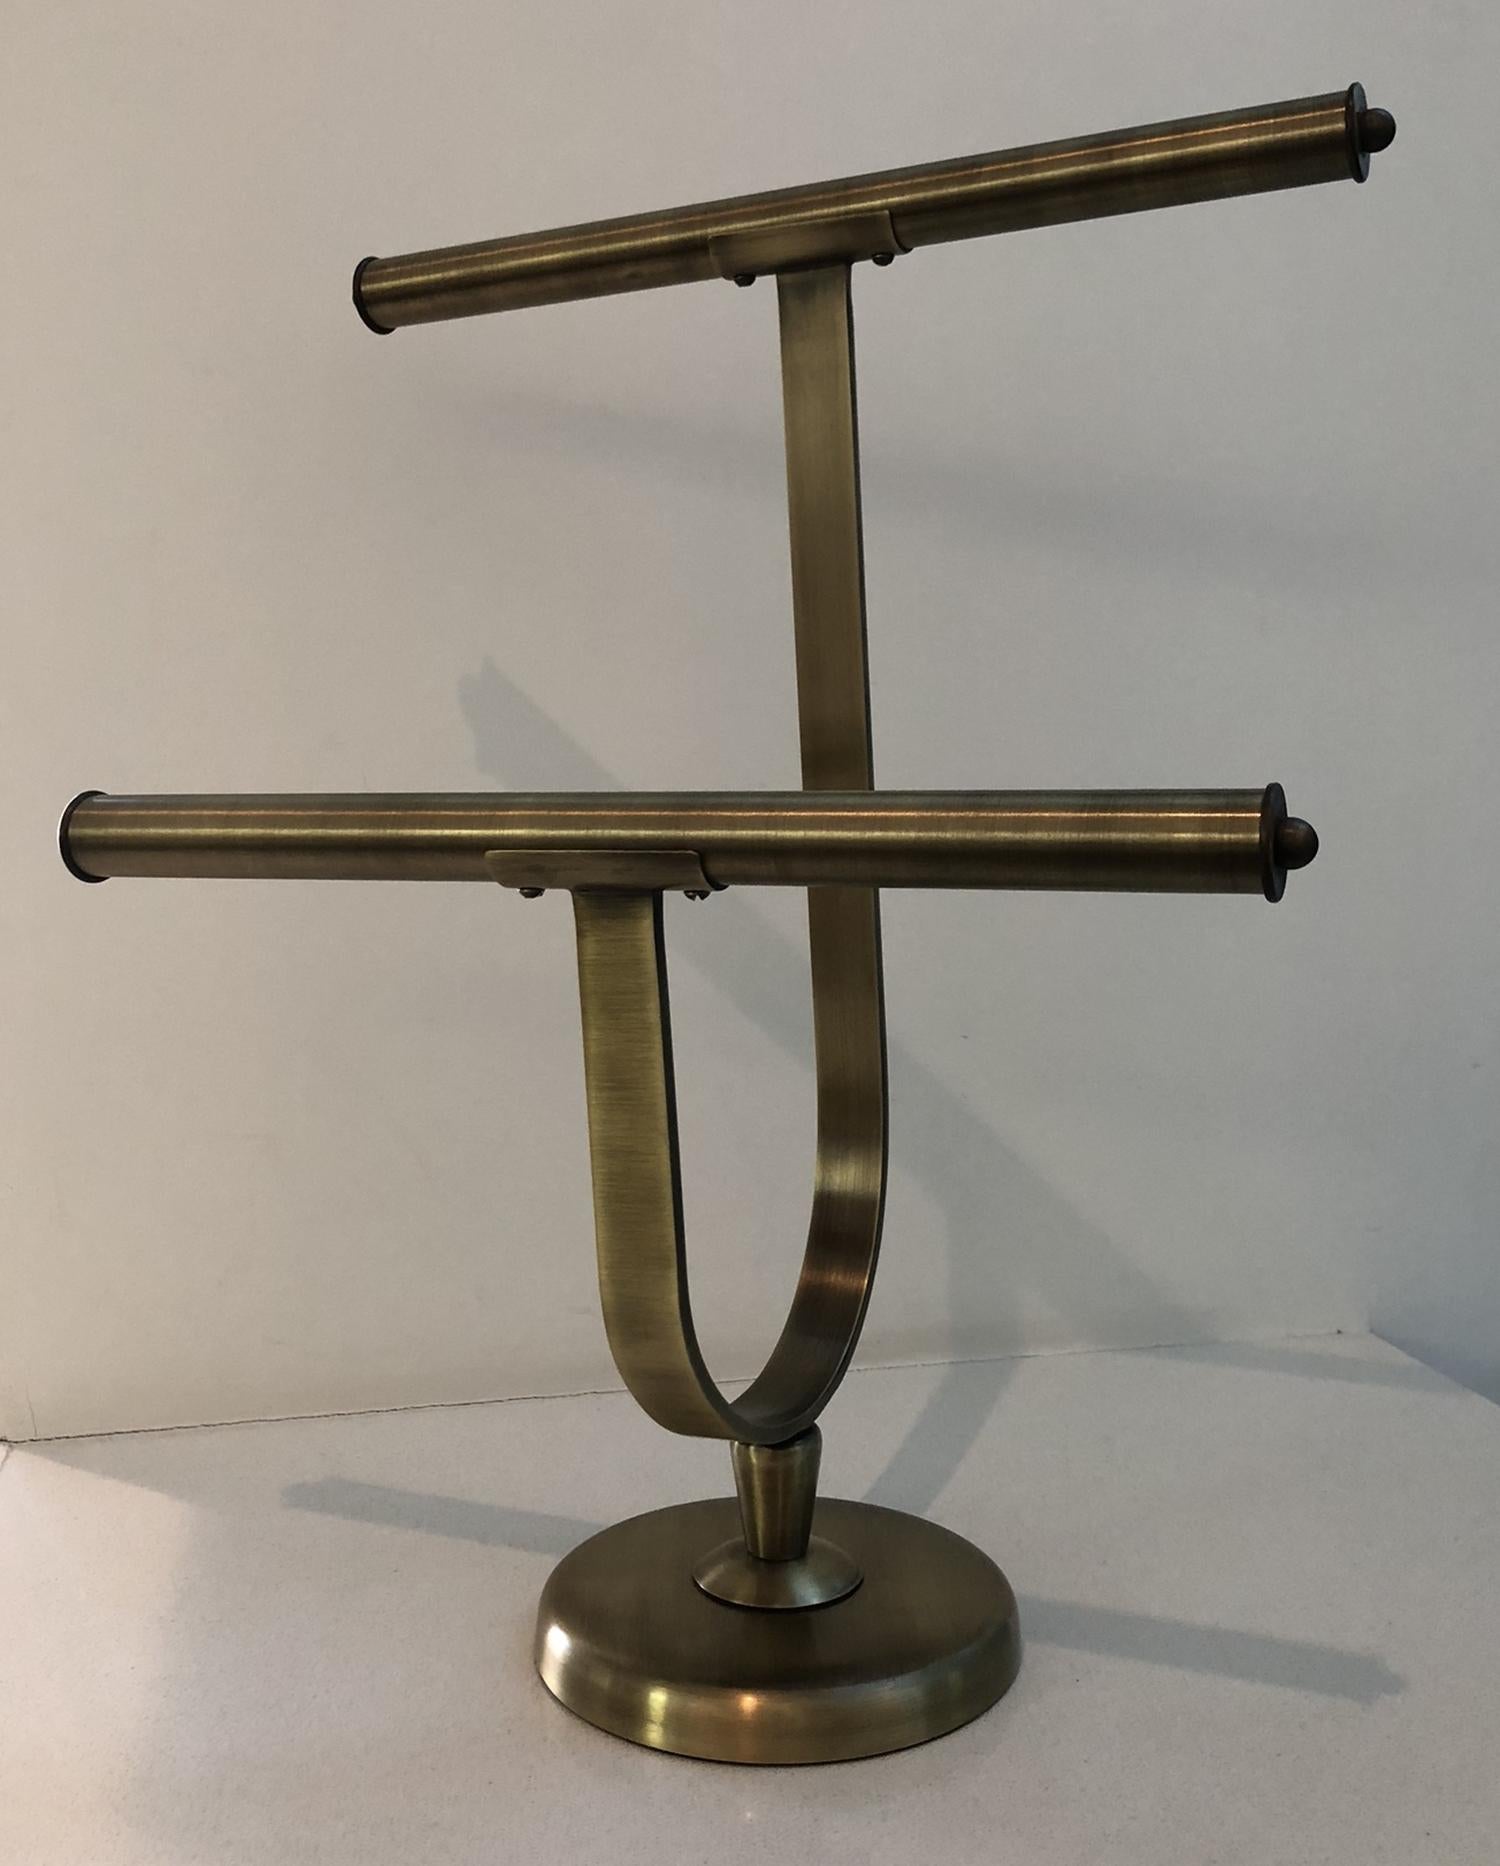 Beautiful brass jewelry or tie holder designed and manufactured by Charles Hollis Jones in the 1960s, the brass has a nice aged patina and is in good to excellent condition.
Measurements:
18